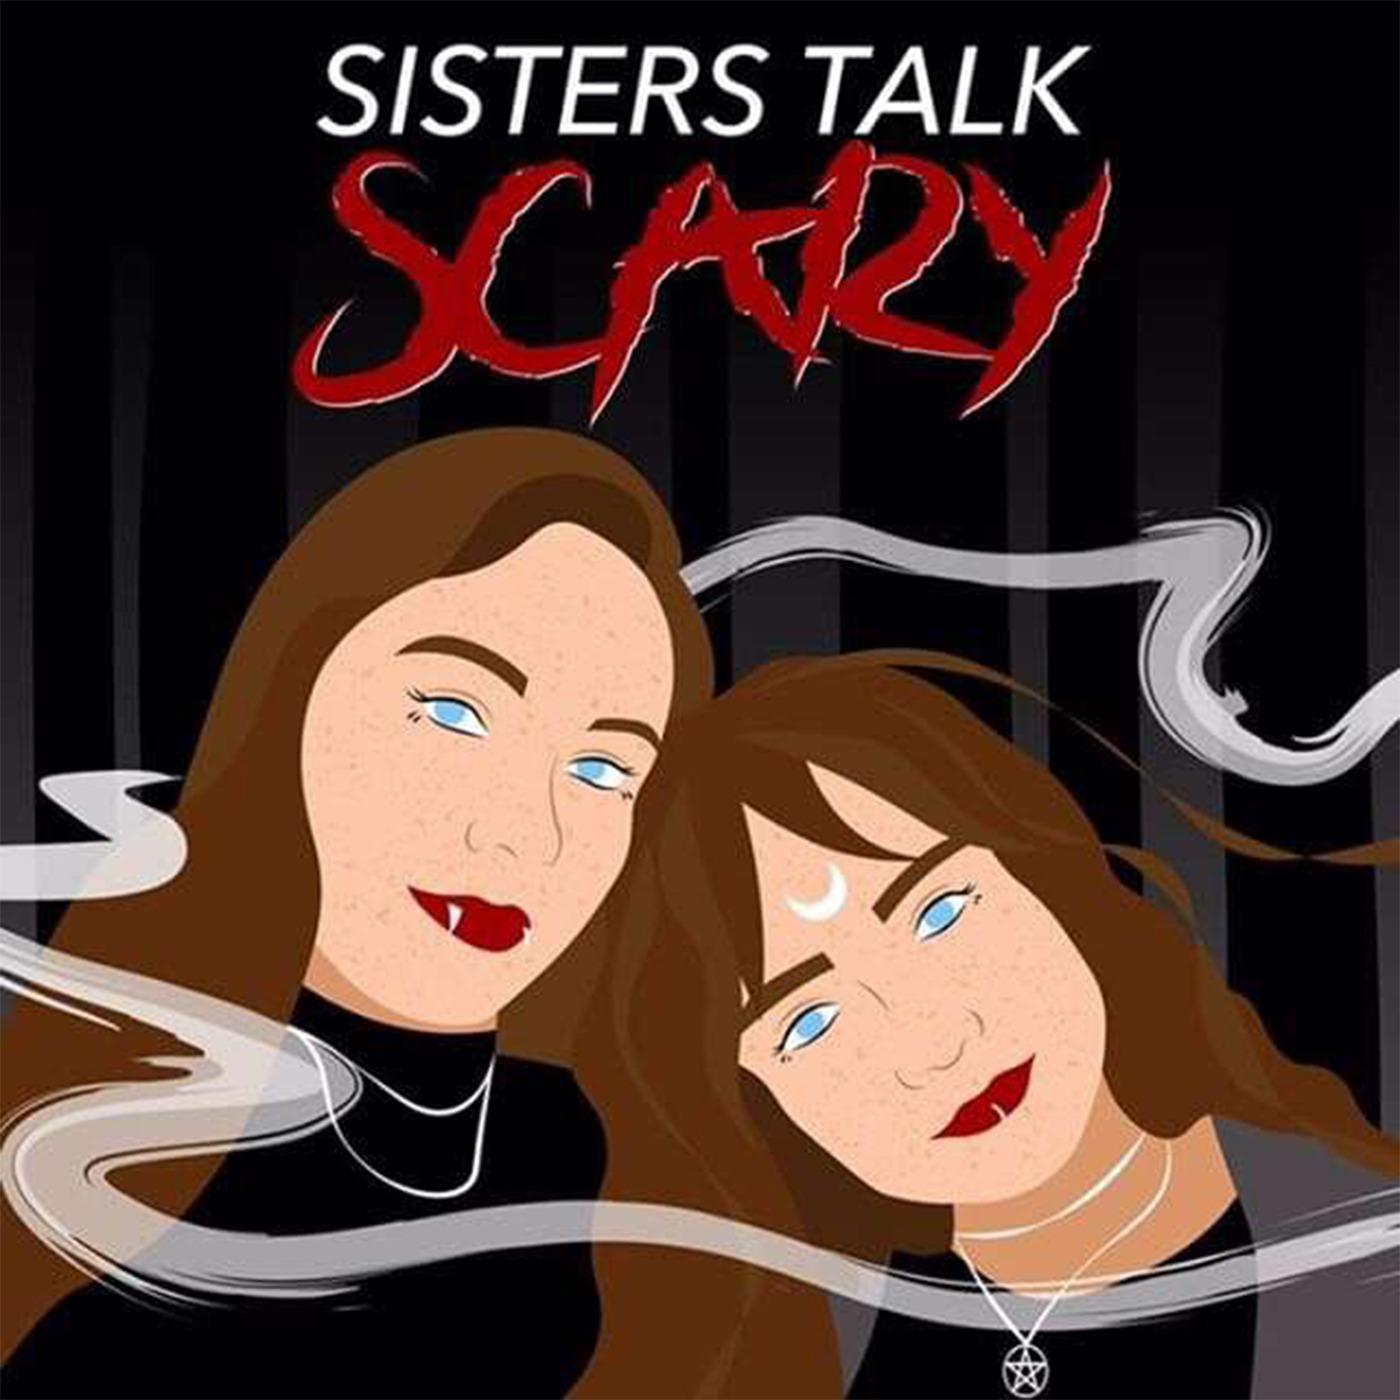 Sisters Talk Scary